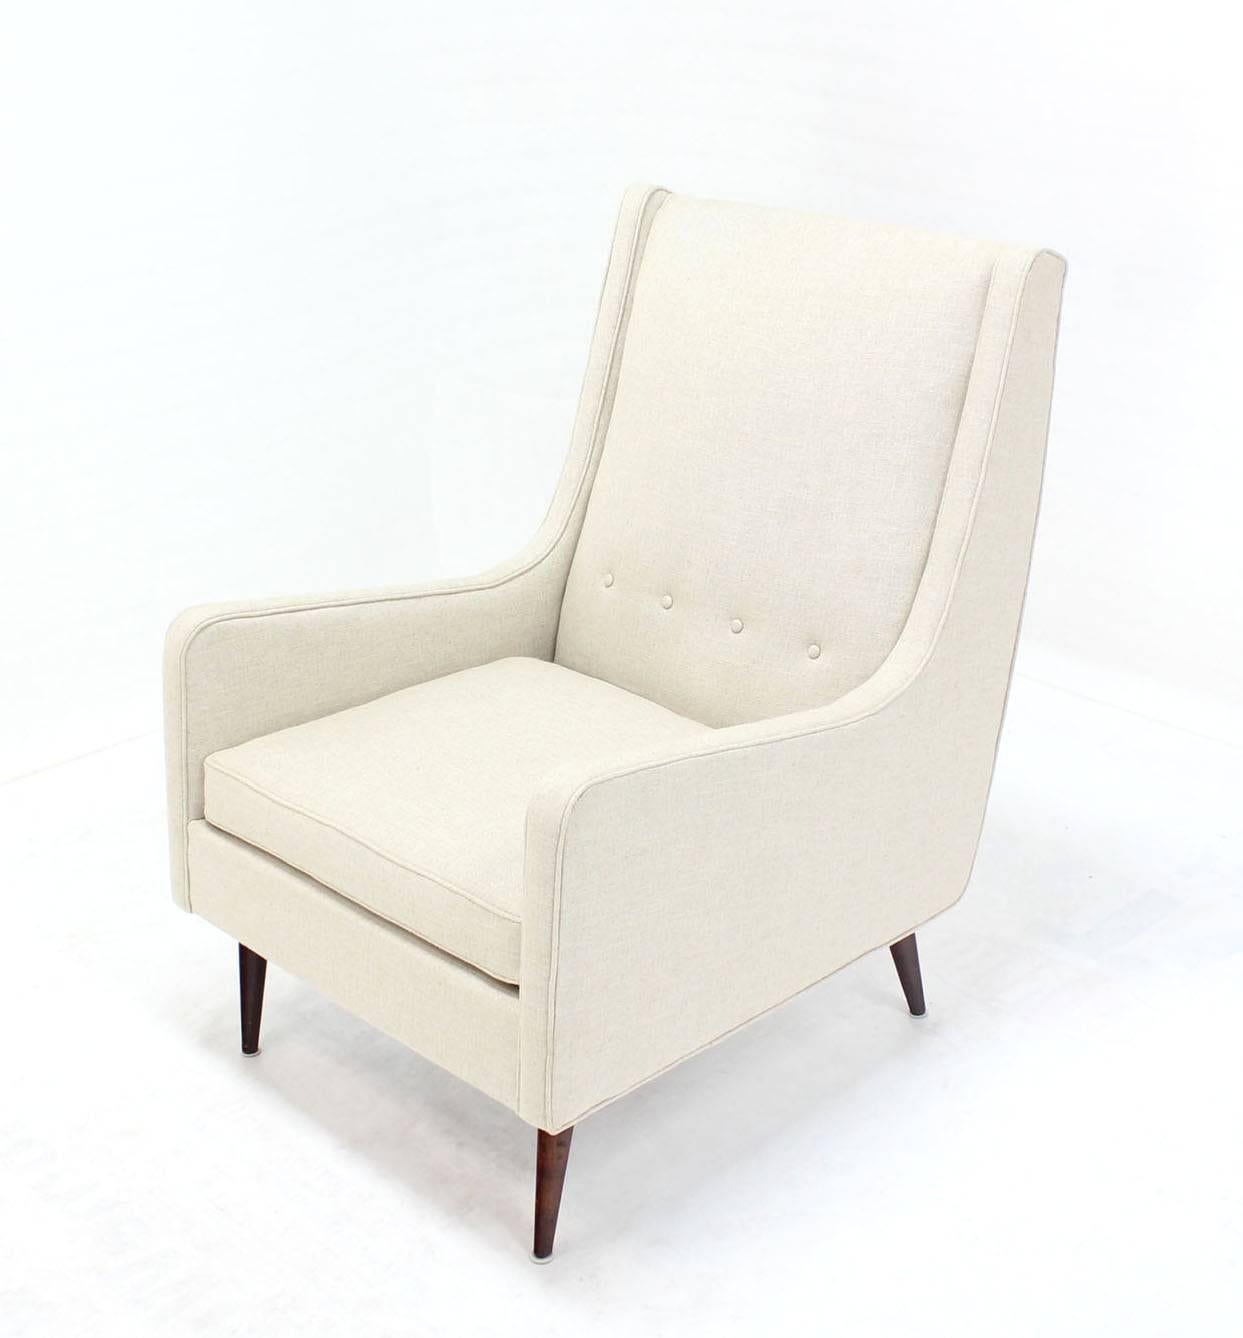 Newly upholstered in white linen most likely Paul McCobb Design mid century modern lounge chair. 